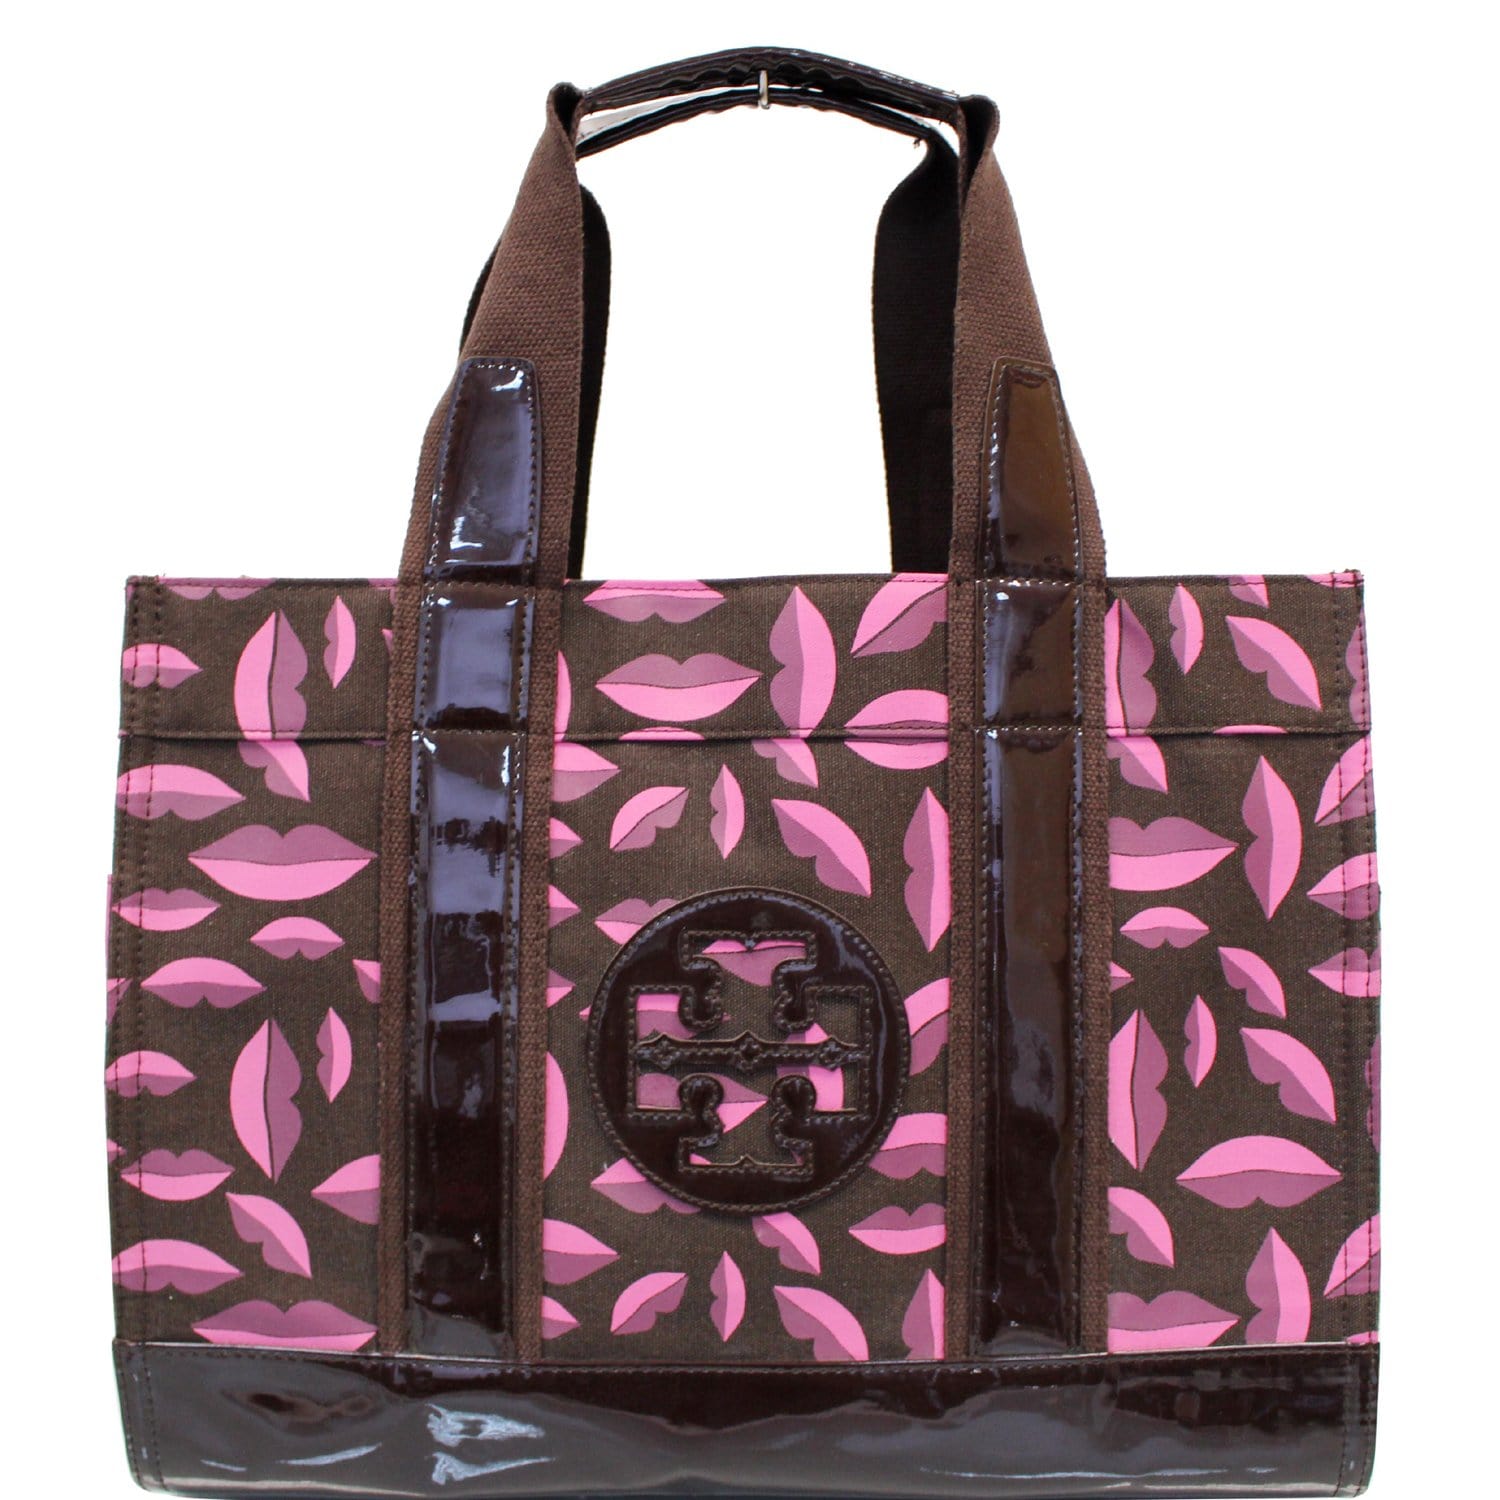 Tory Burch, Bags, Tory Burch Pink Leather Tote Bag